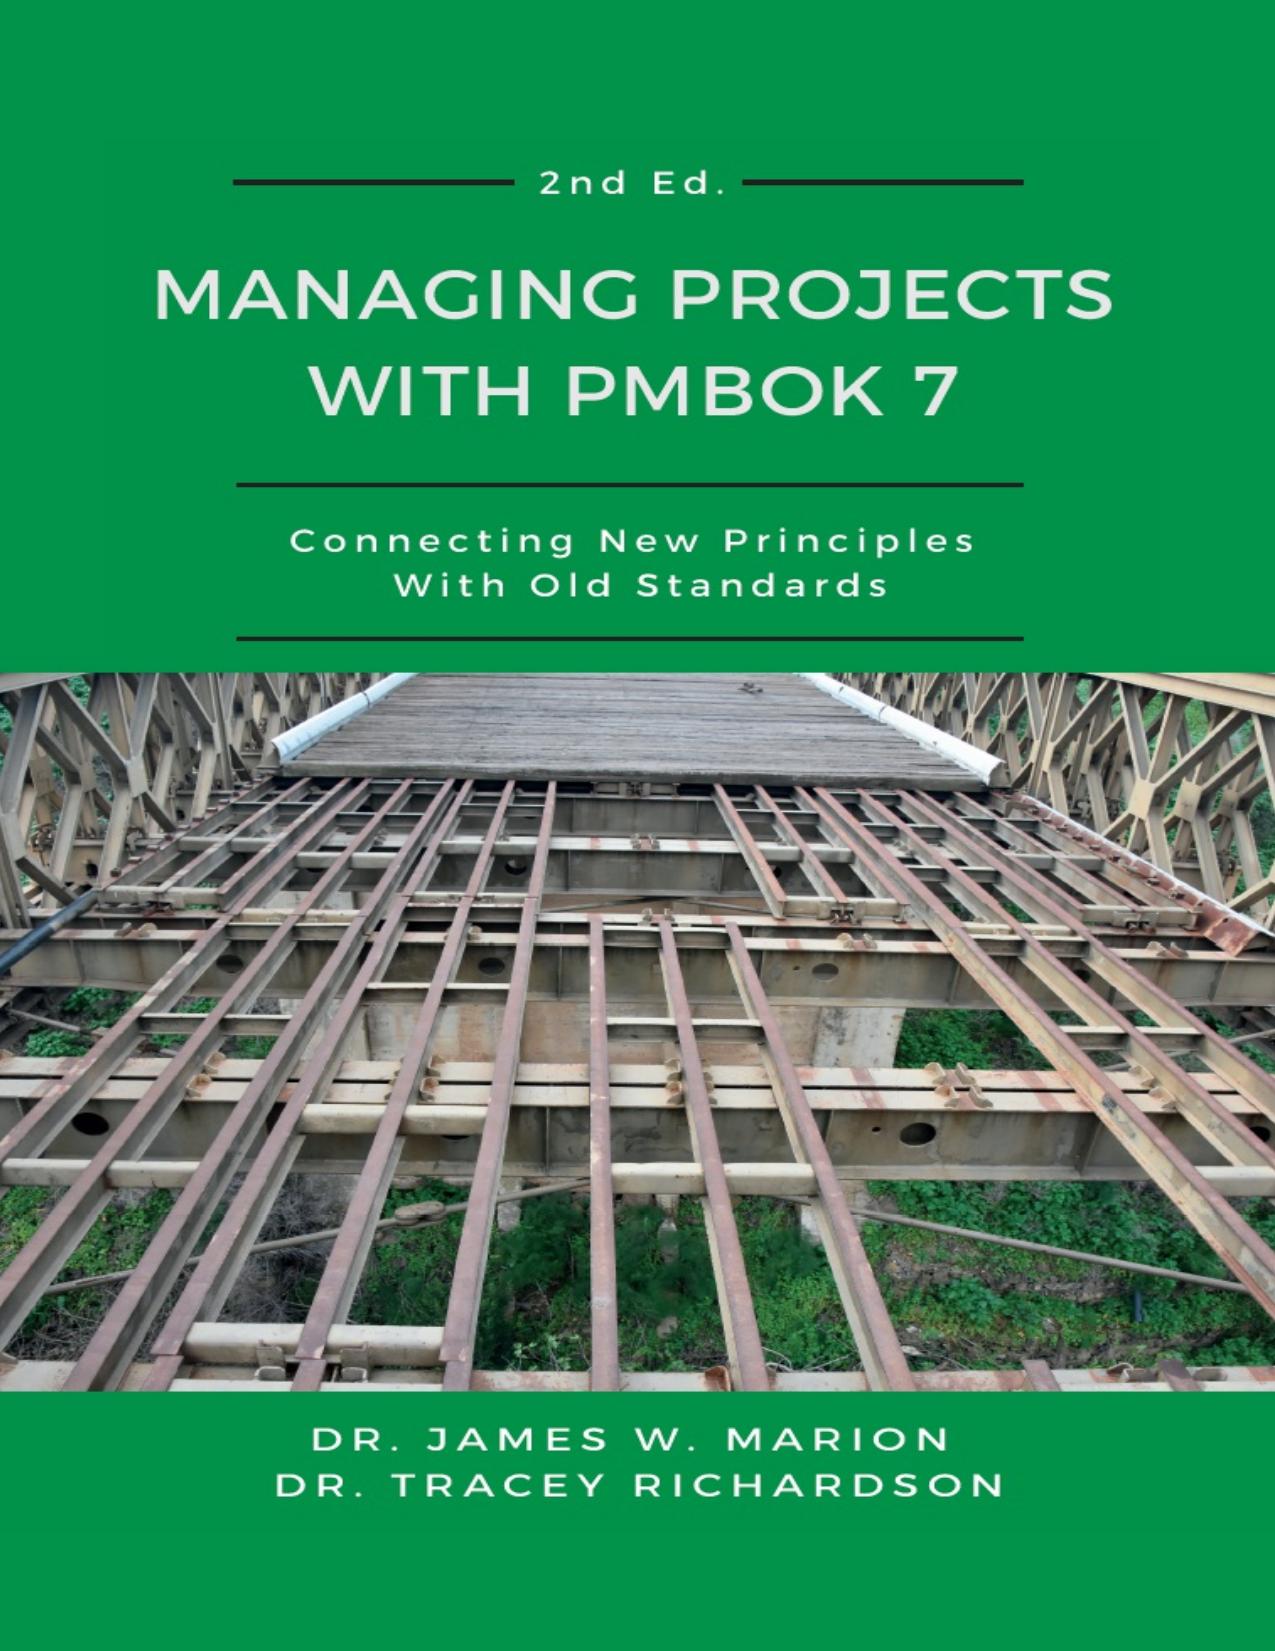 Managing Projects With Pmbok 7: Connecting New Principles With Old Standards